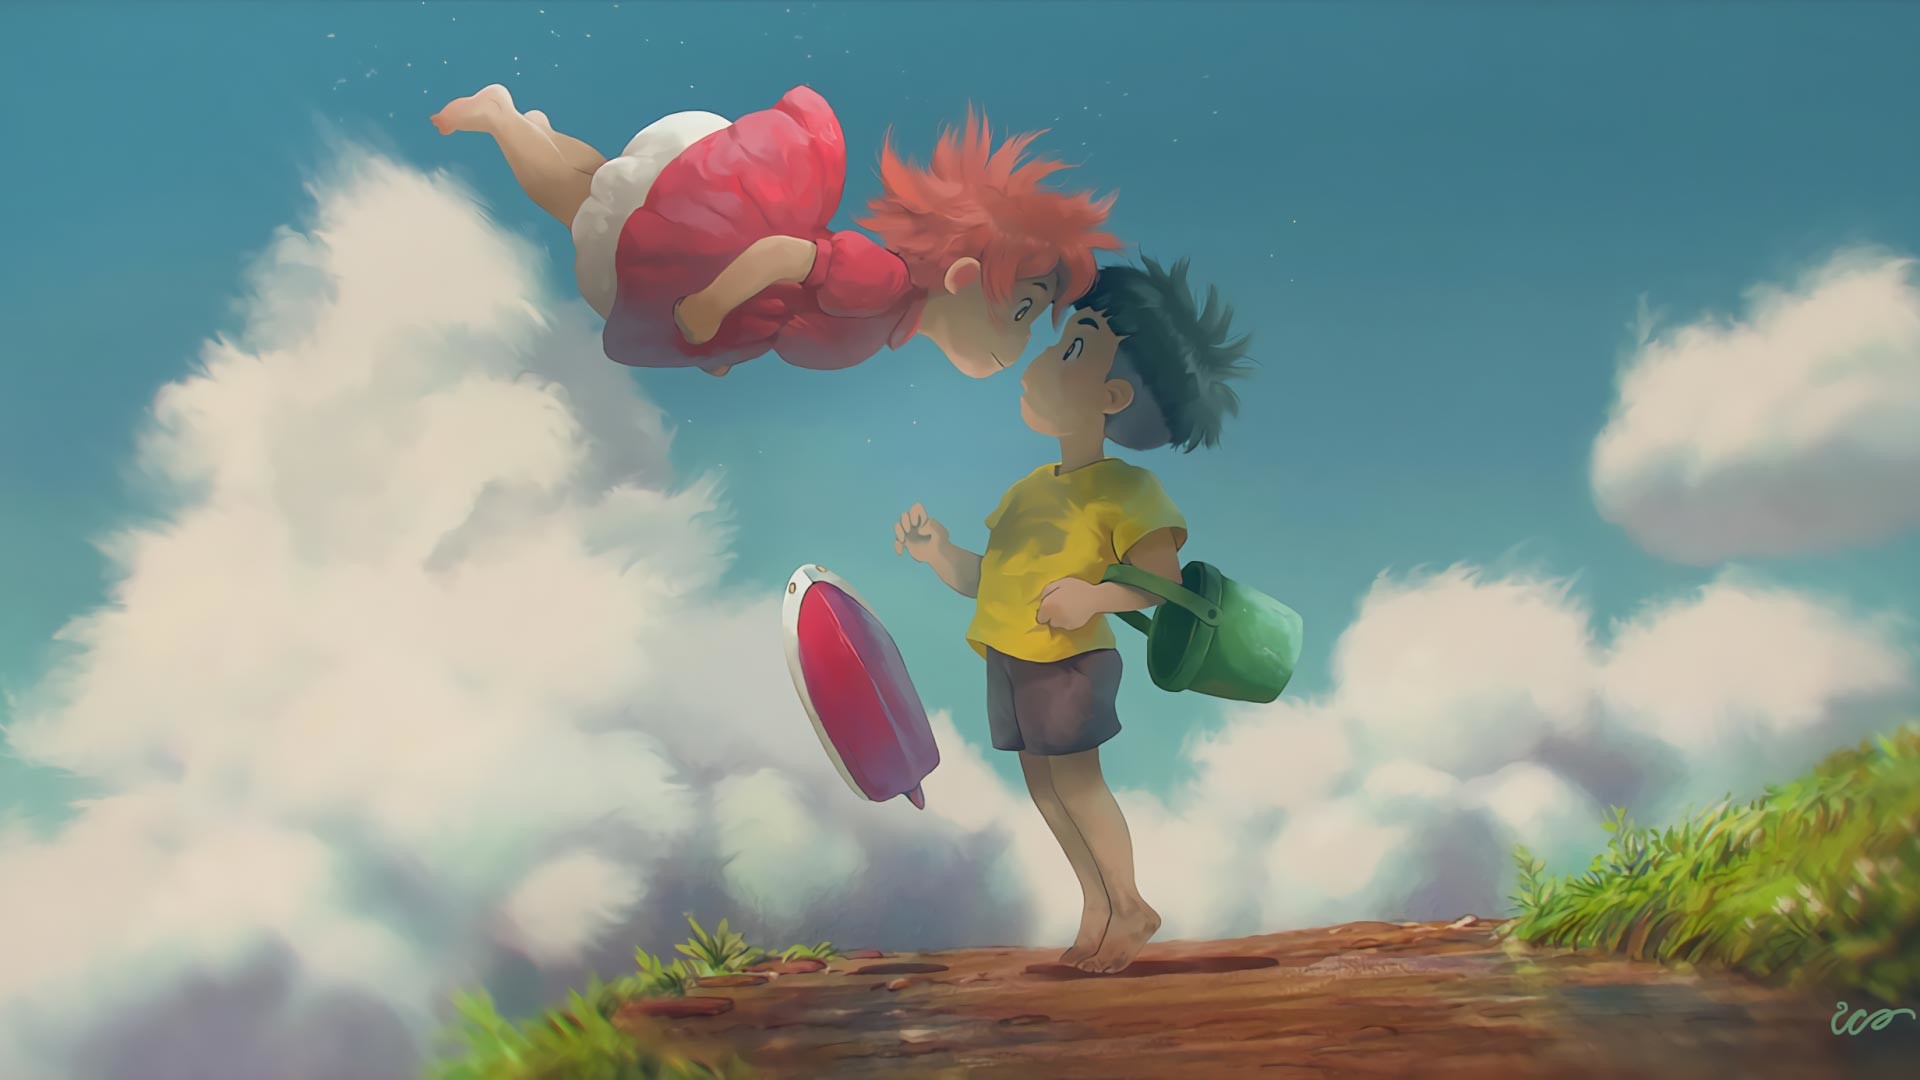 1920x1080 Featuring some cute artwork of the main characters from the movie, Ponyo  the goldfish and Sosuke, the human boy. Showing off the memorable scenes  from the ...